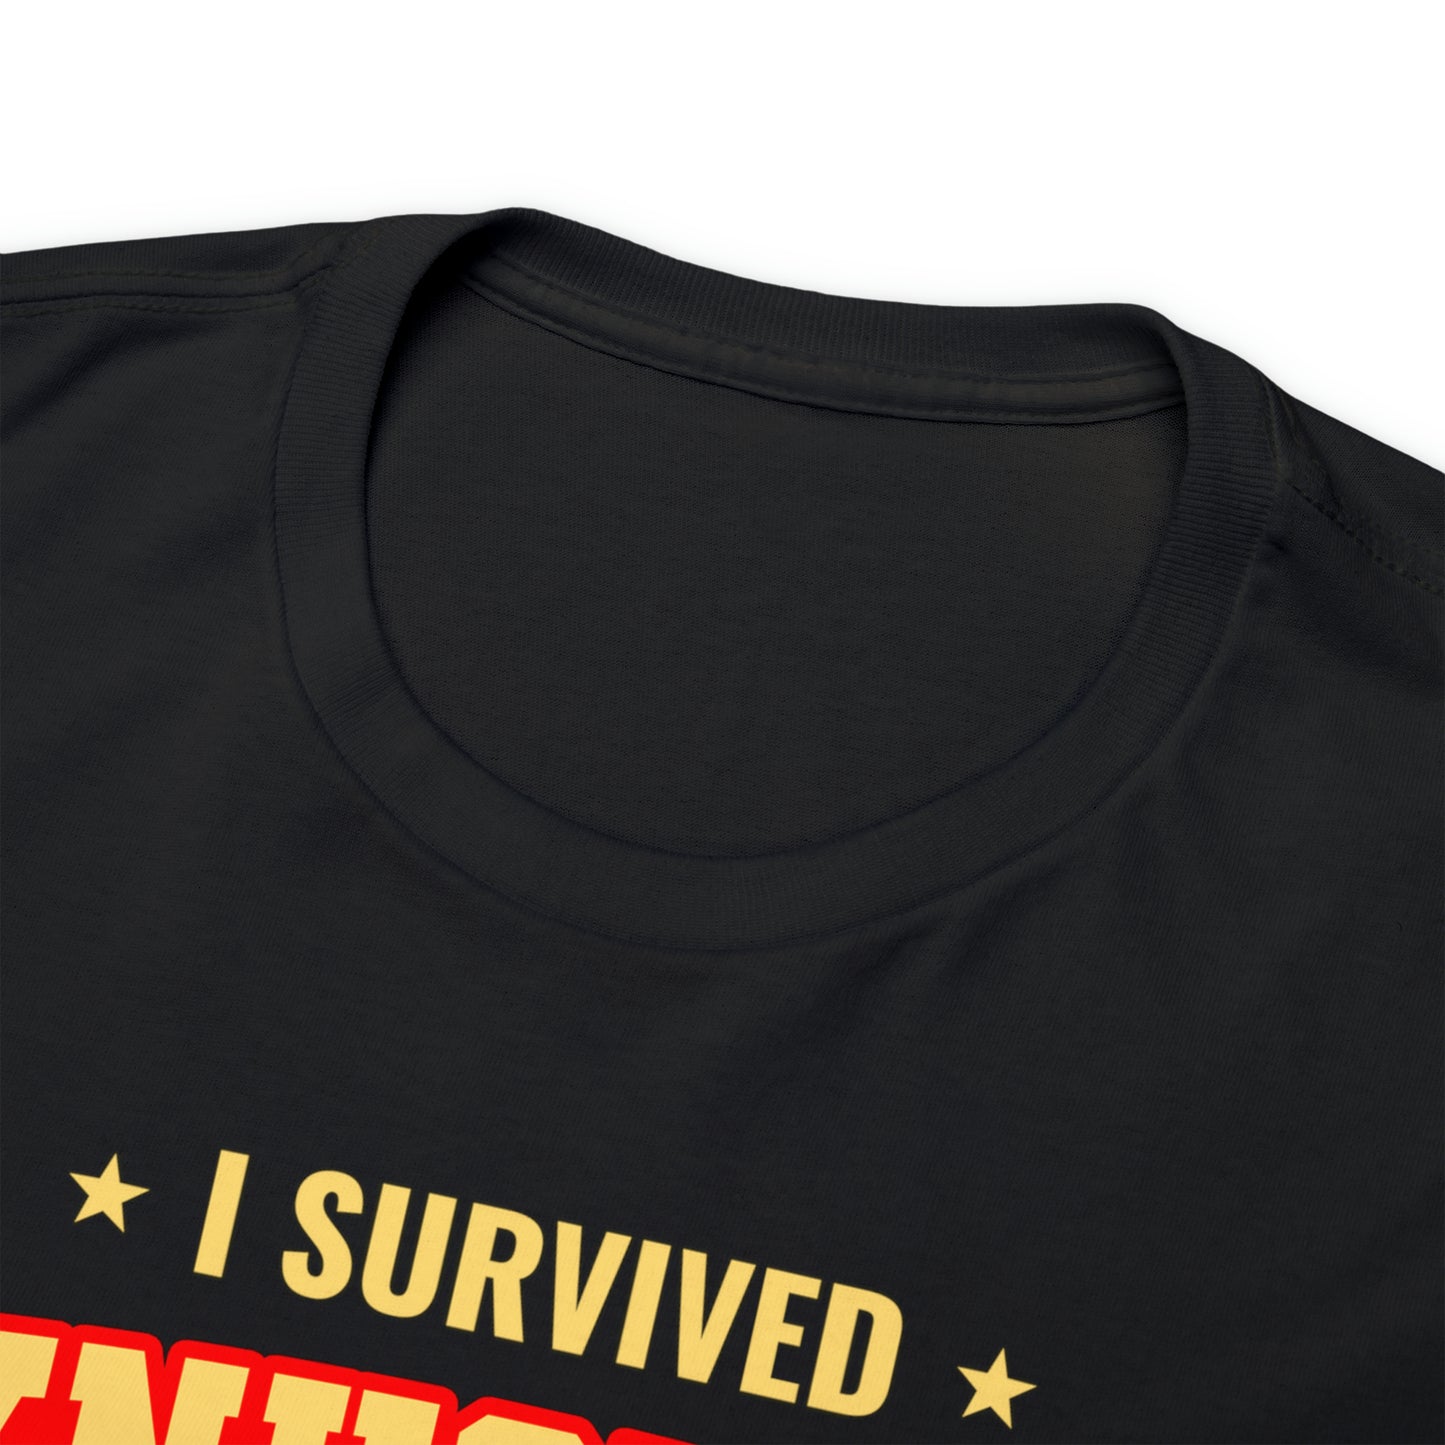 I Survived the Knuckle Sandwich T-Shirt!